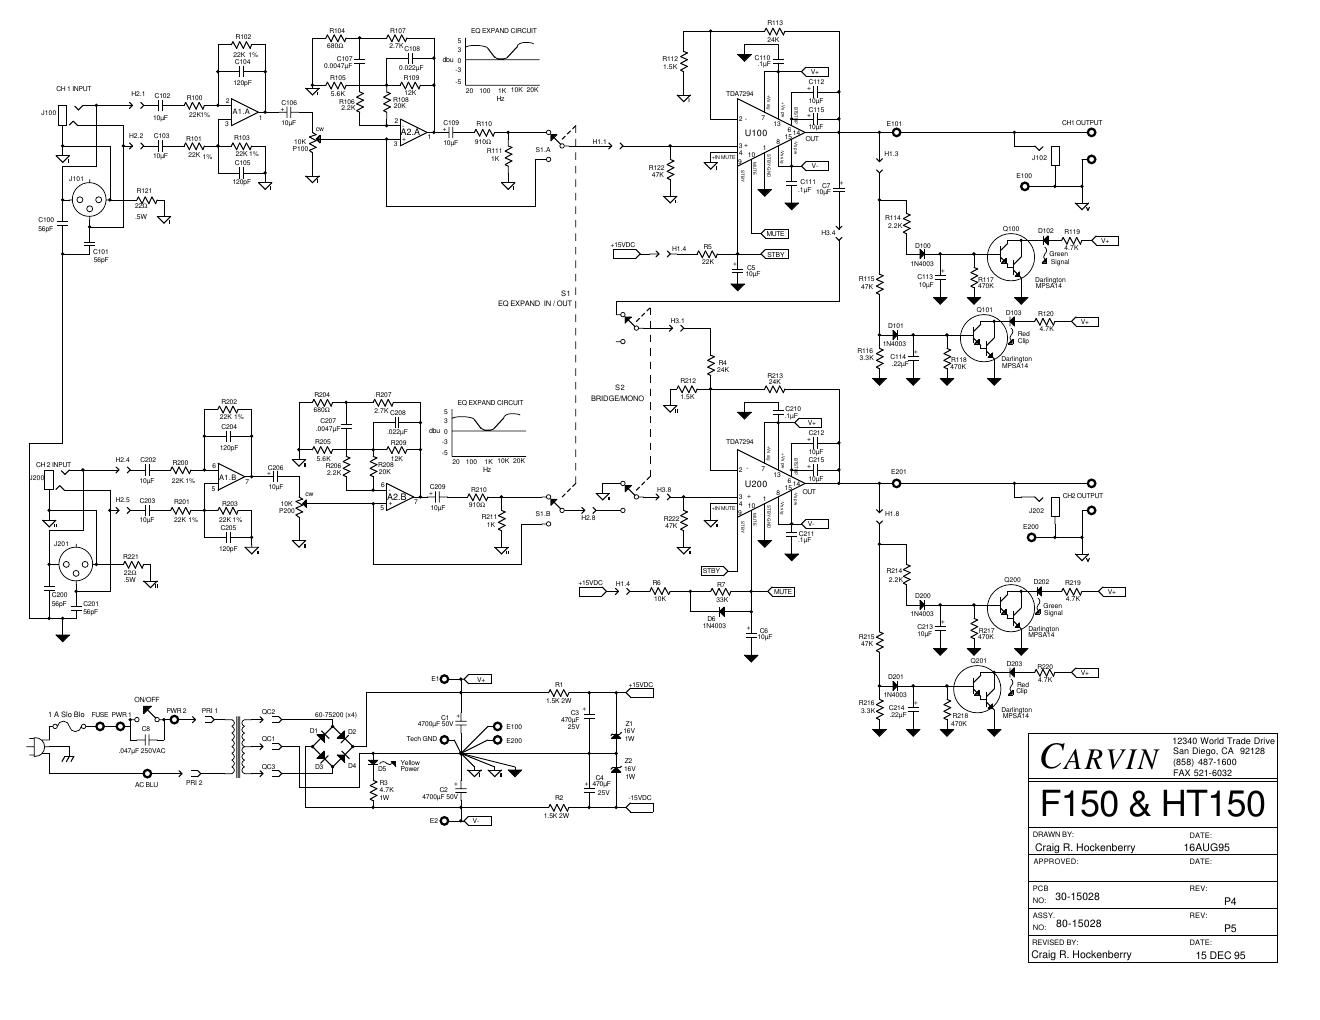 carvin f 150 ht150 power amp rev 4 schematic